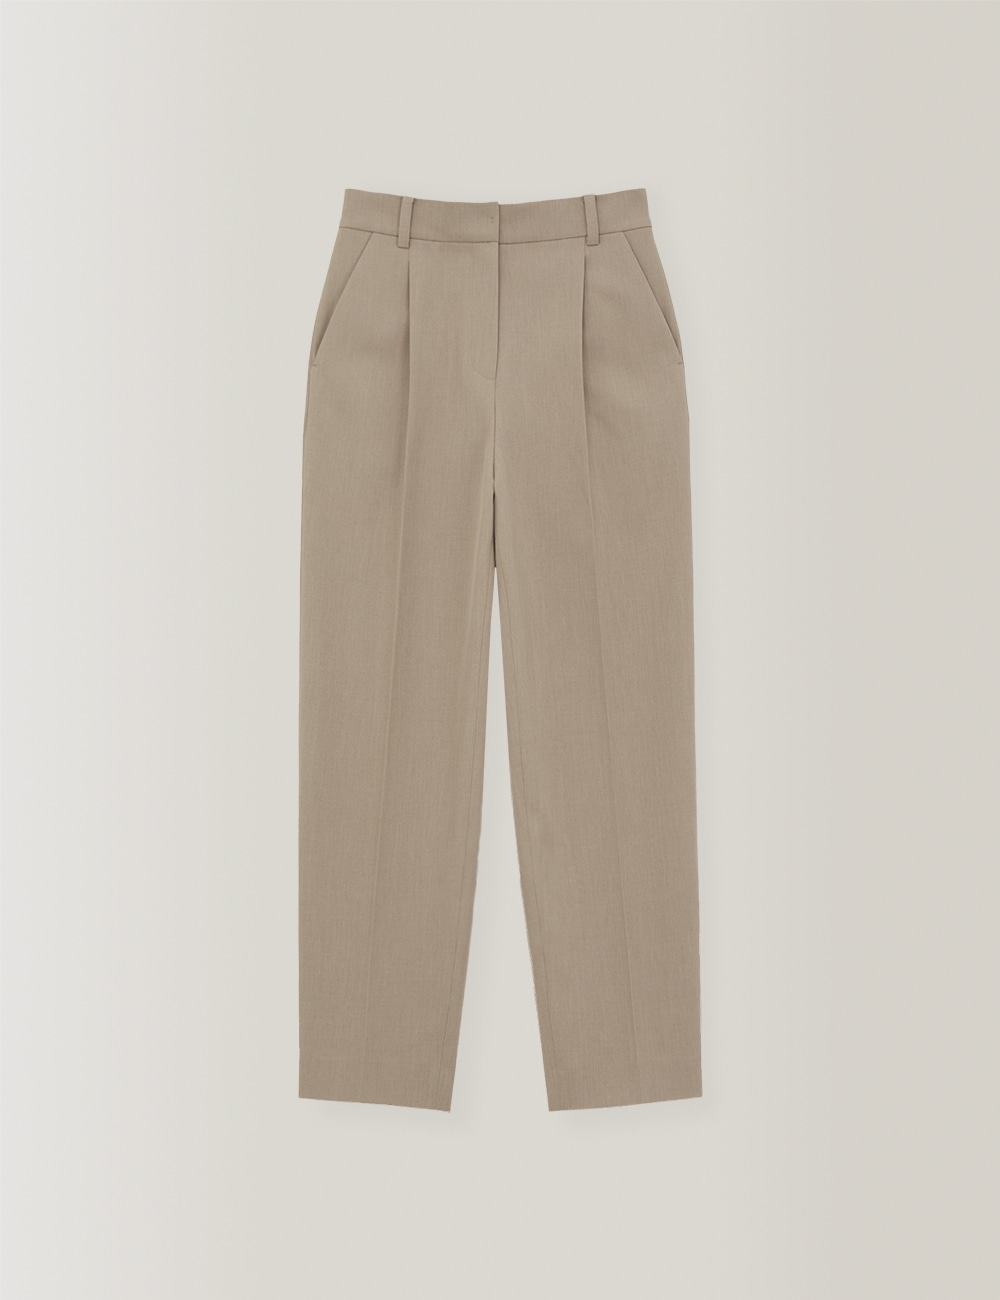 Summer Classic Tapered Pants (Sand Beige)